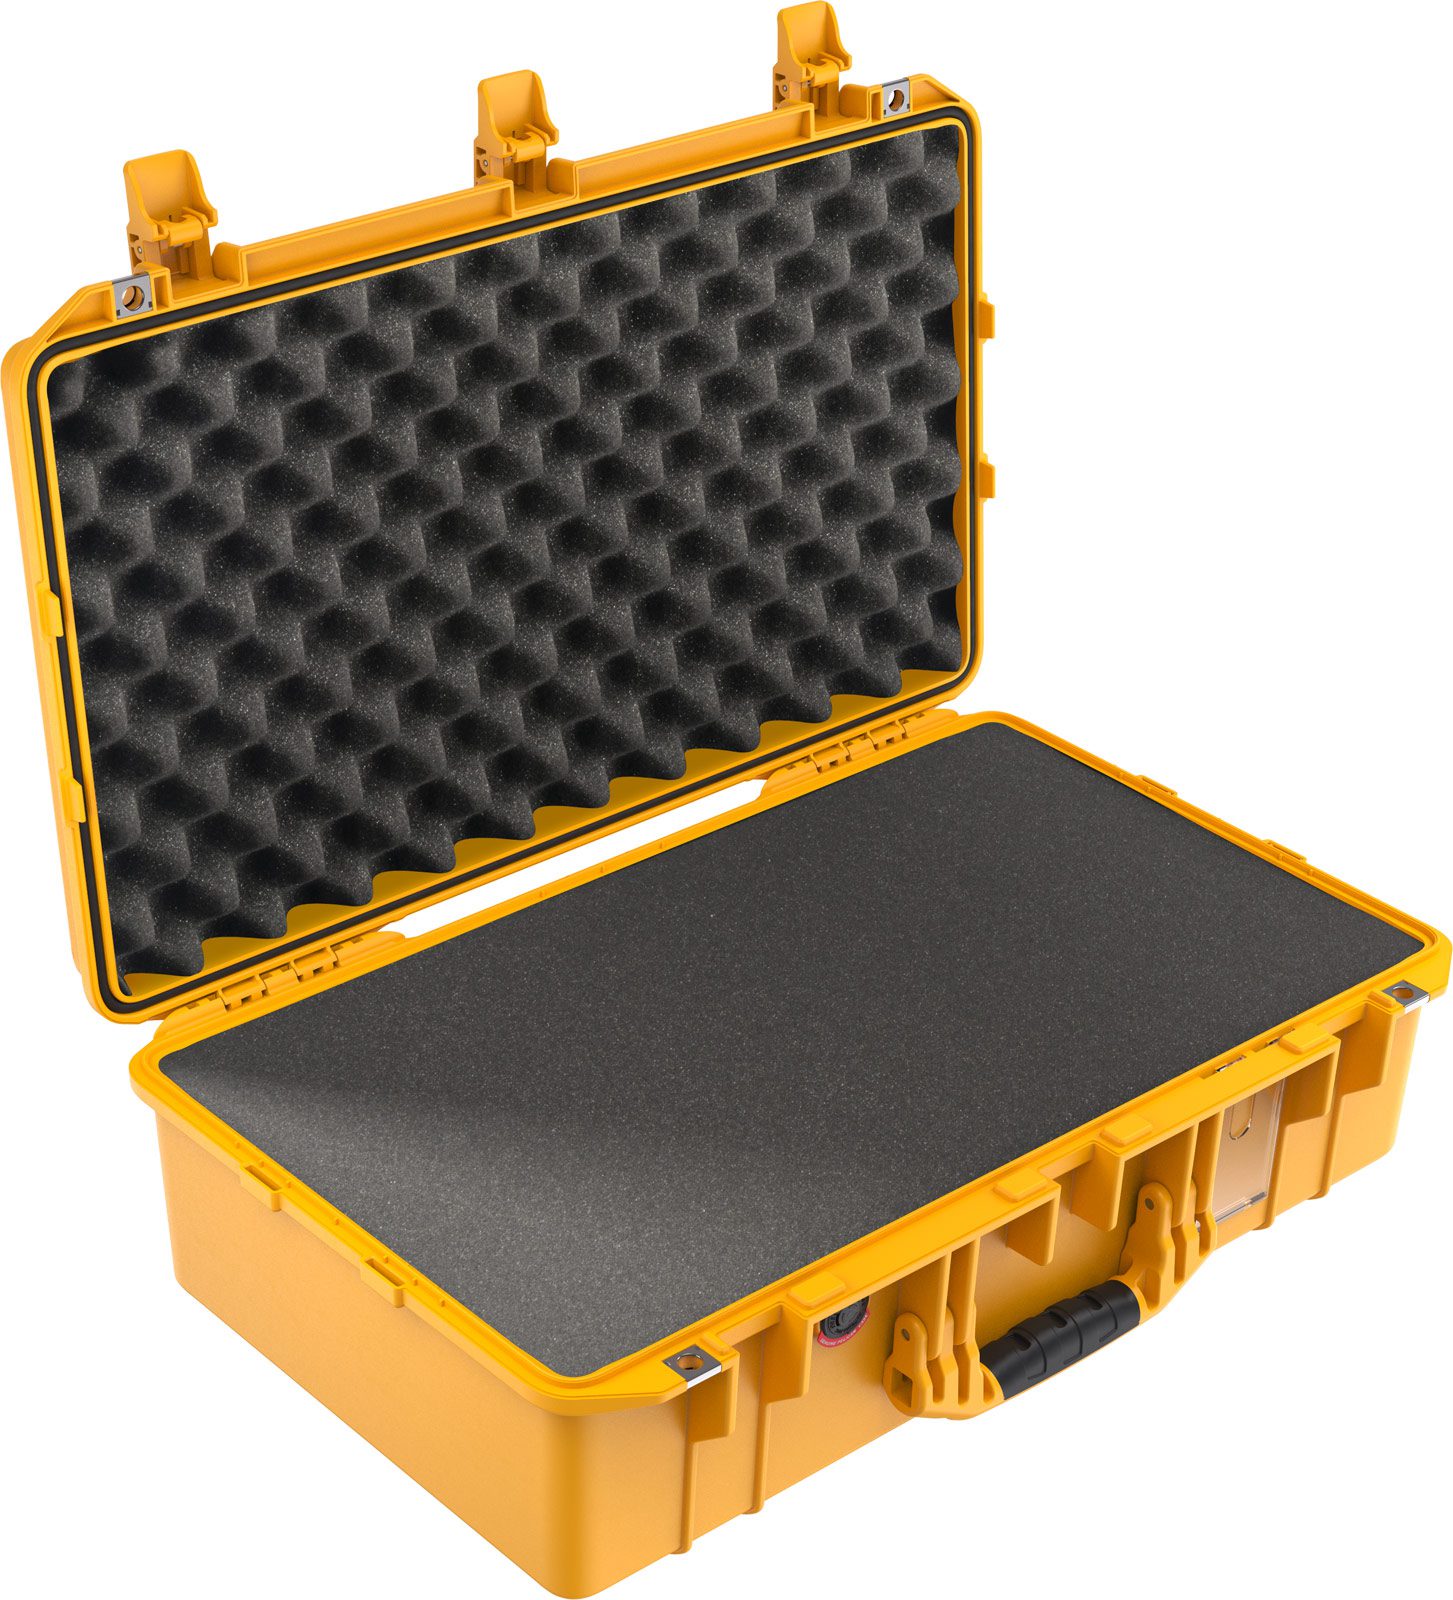 Pelican Products 1555 Air Case - Yellow, Foam